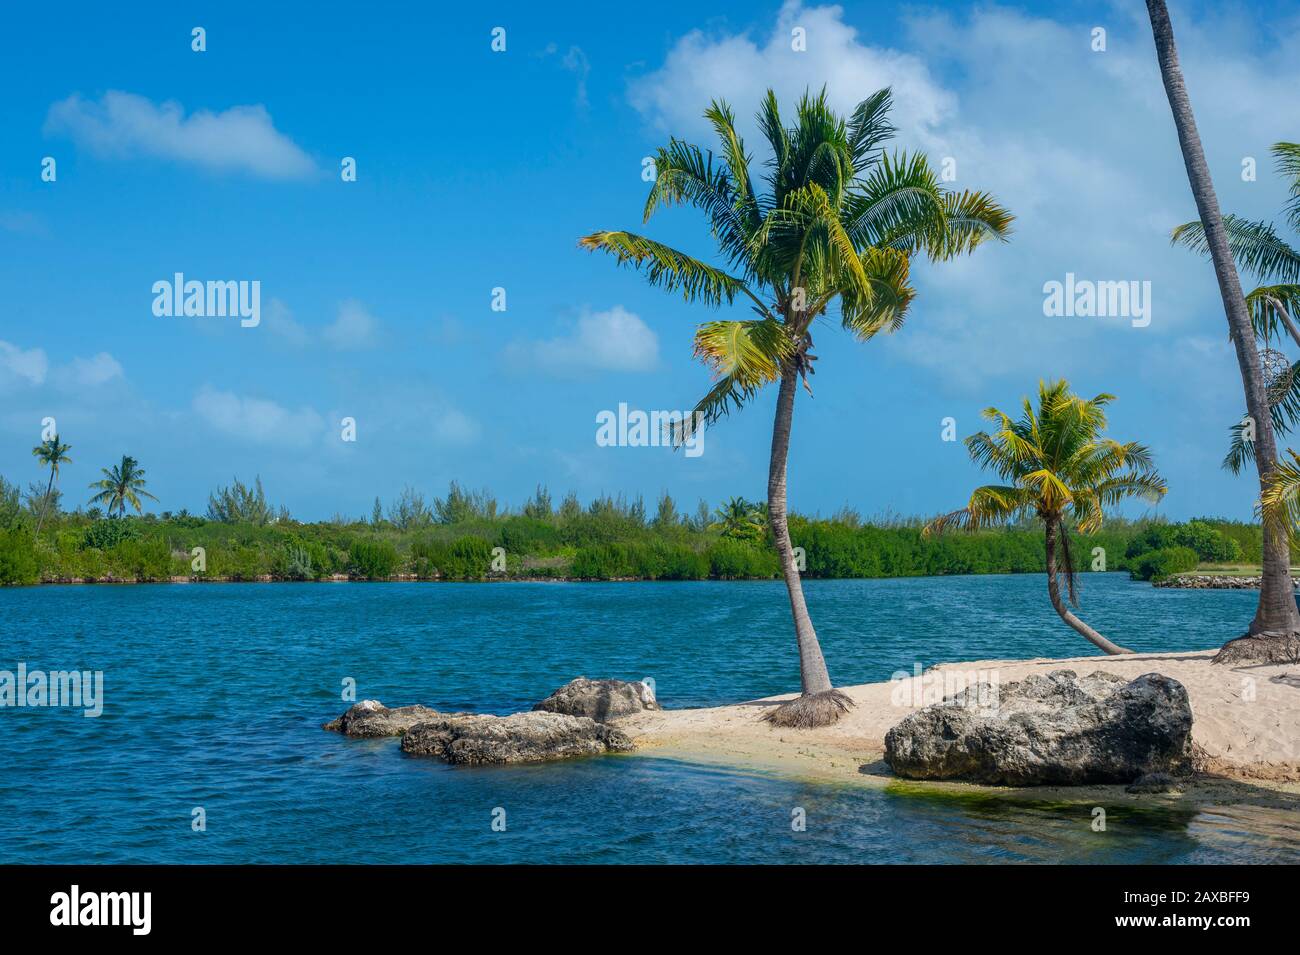 Palm trees and shadows on perfect sandy beach at calm waters edge Stock Photo